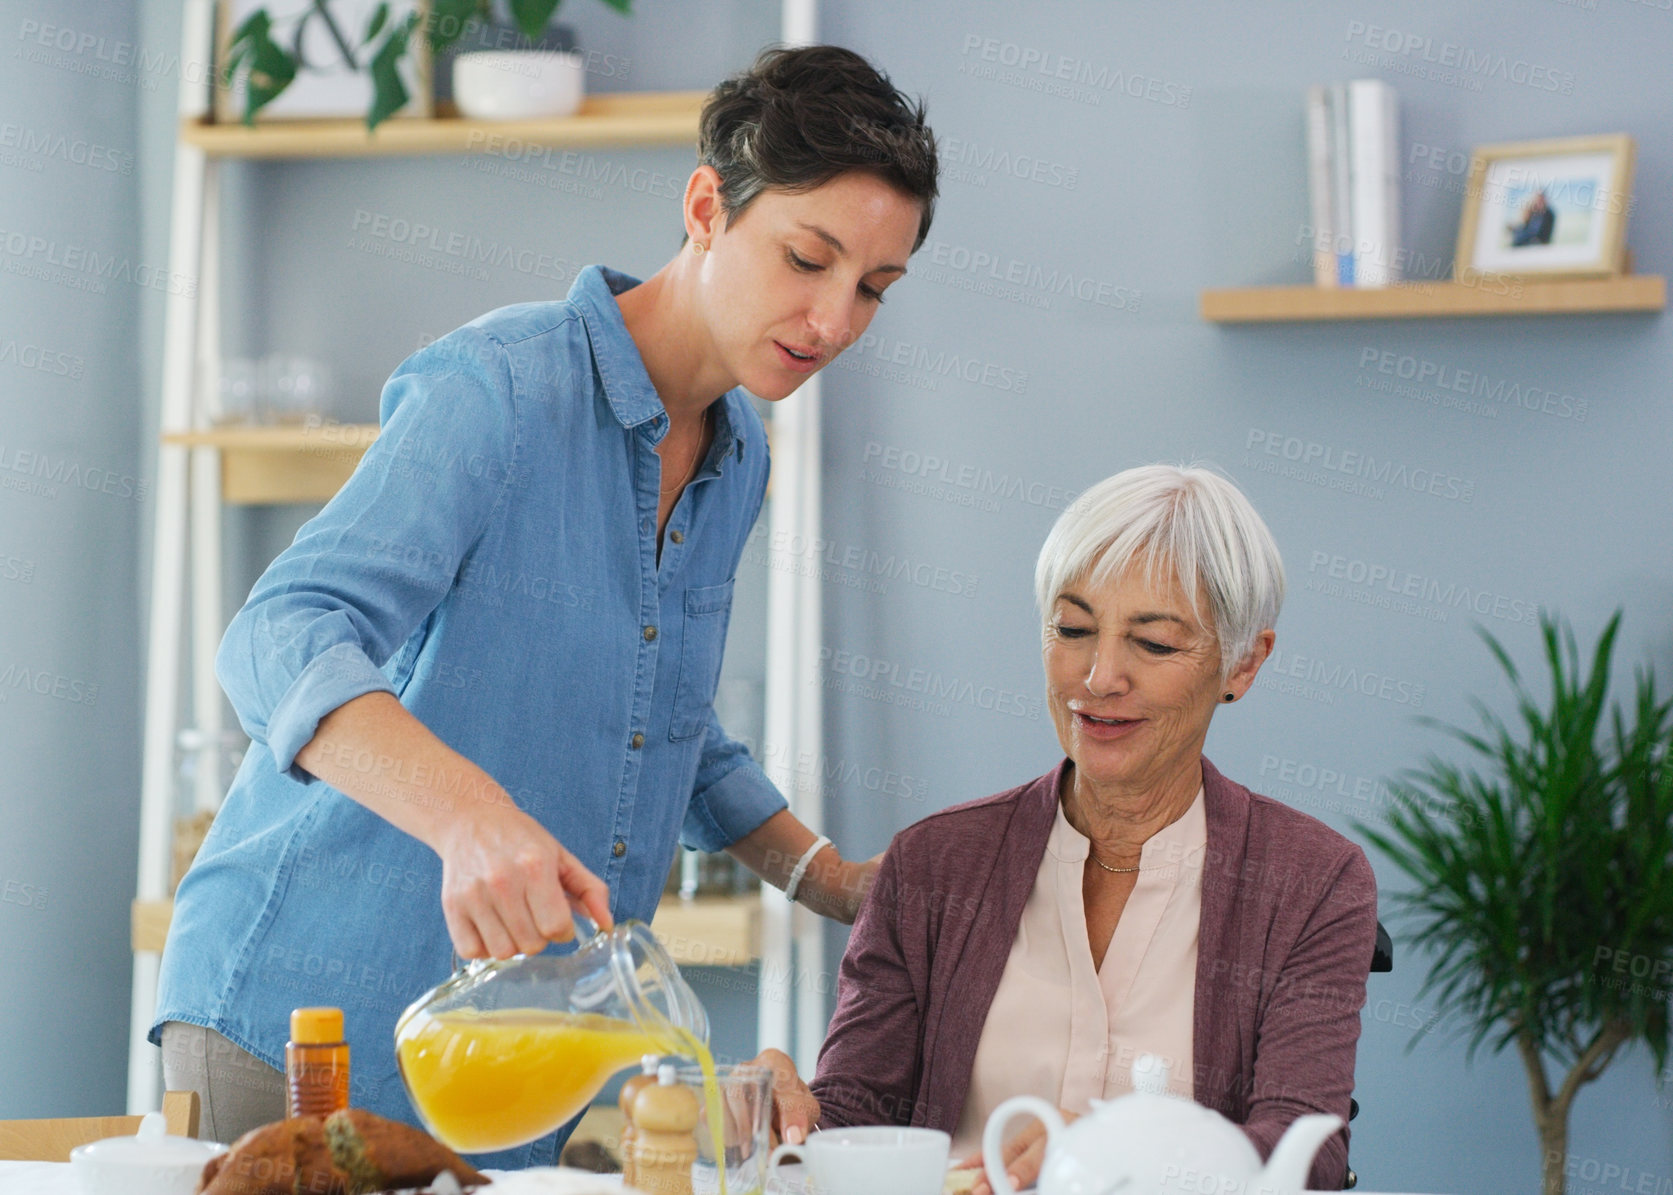 Buy stock photo Cropped shot of a happy senior woman sitting and having breakfast with her attractive young daughter while at home